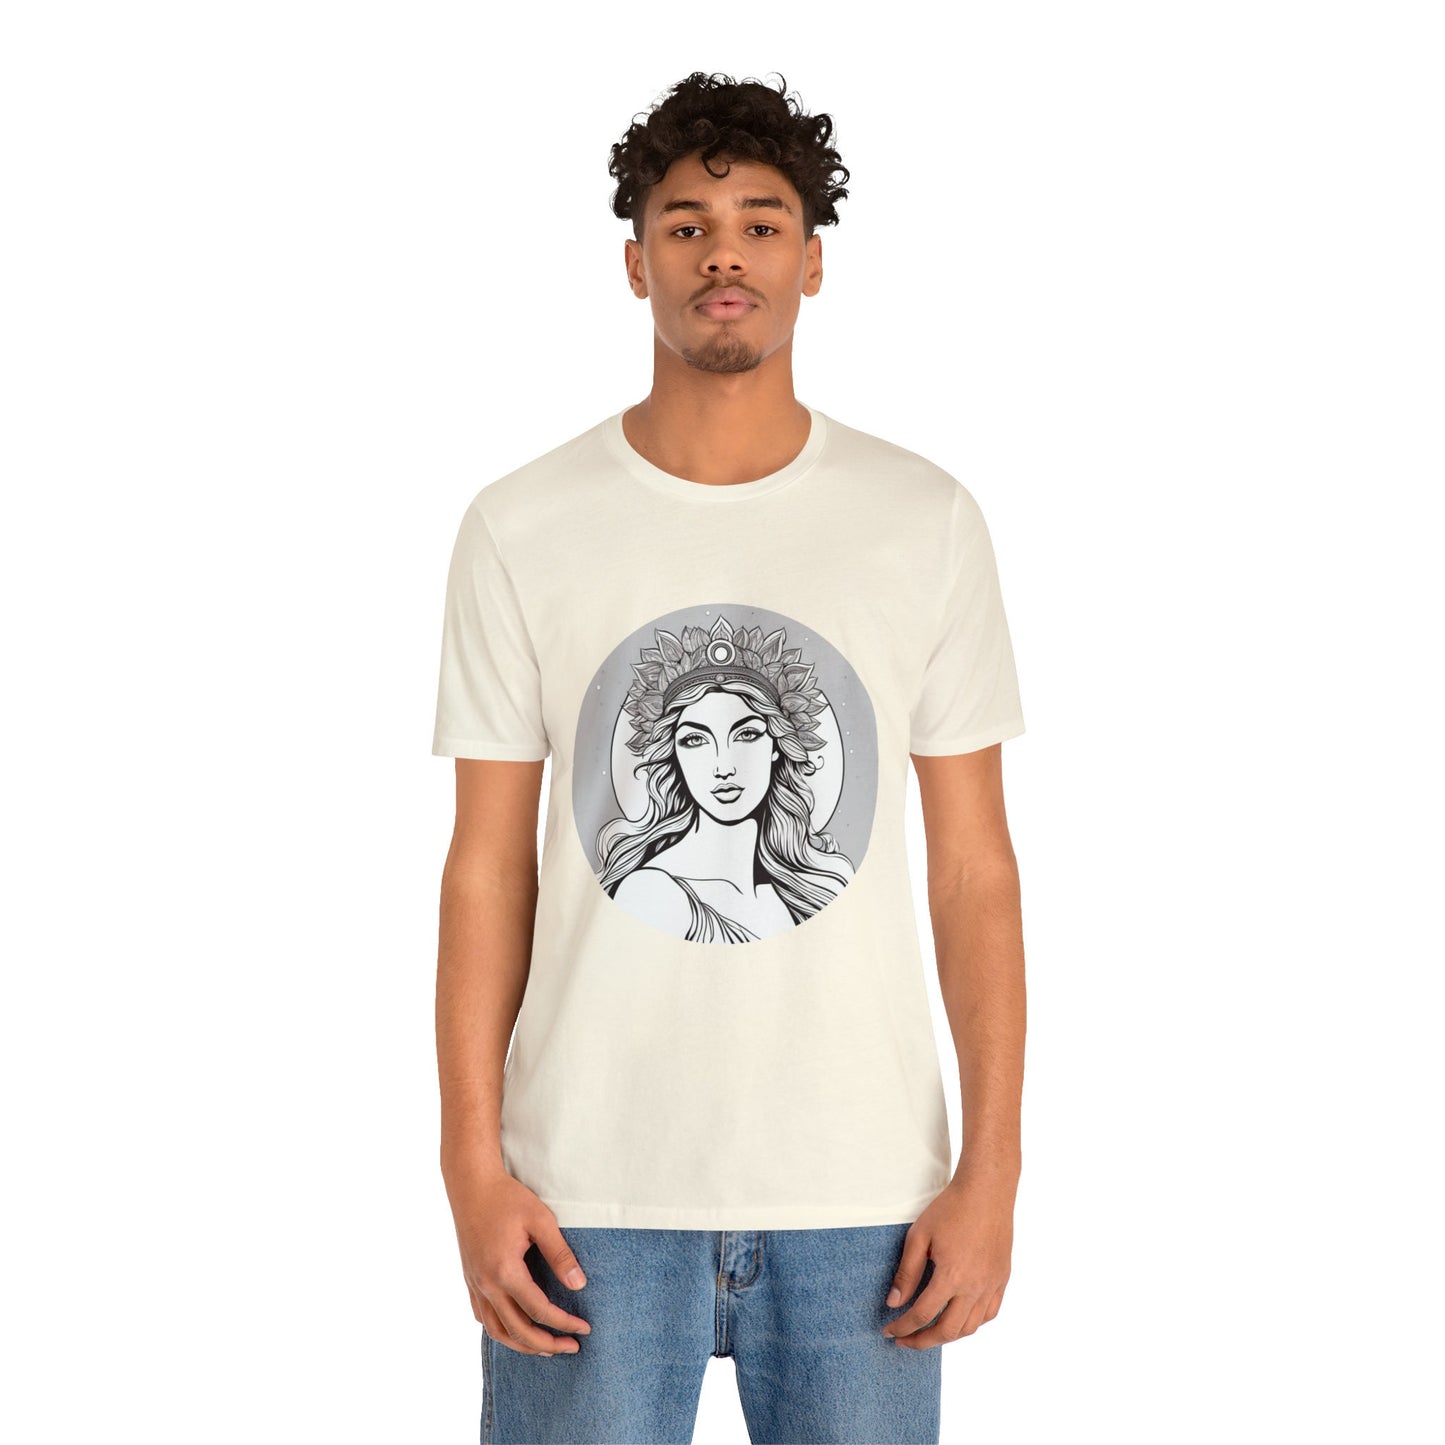 Aphrodite Tattoo Pin-Up Girl Short Sleeve Tee Perfect Gift for Men and Women